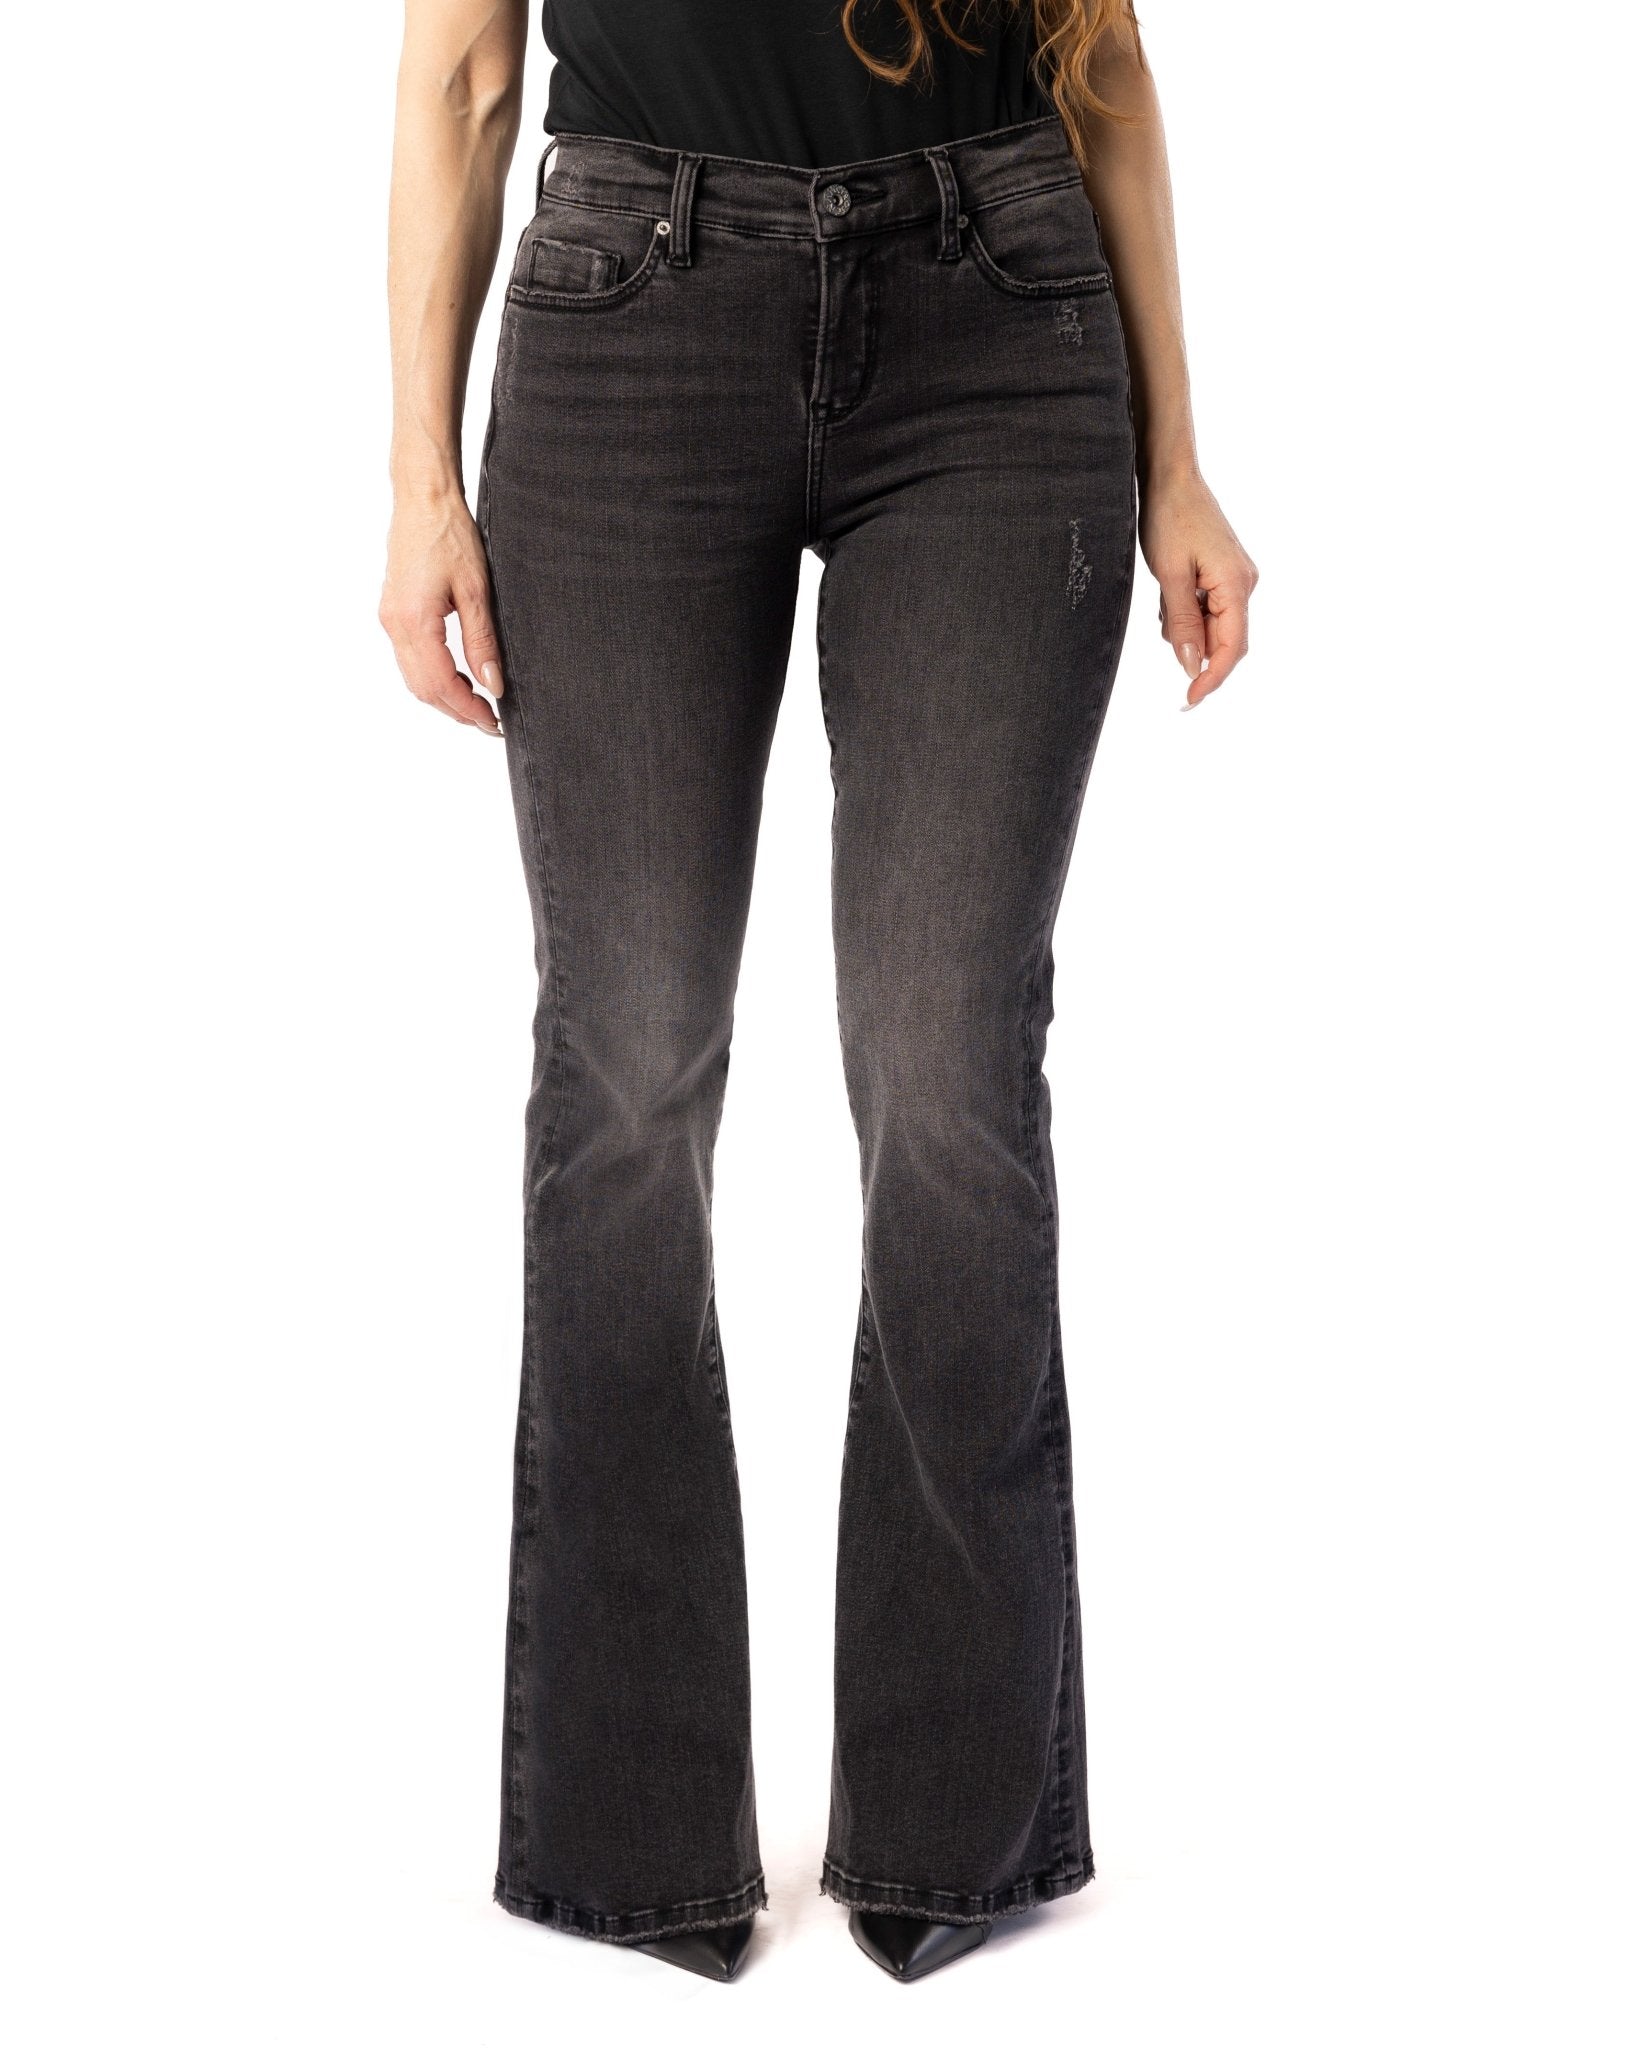 High Rise Flare Distressed Jeans Black - Southern Fashion Boutique